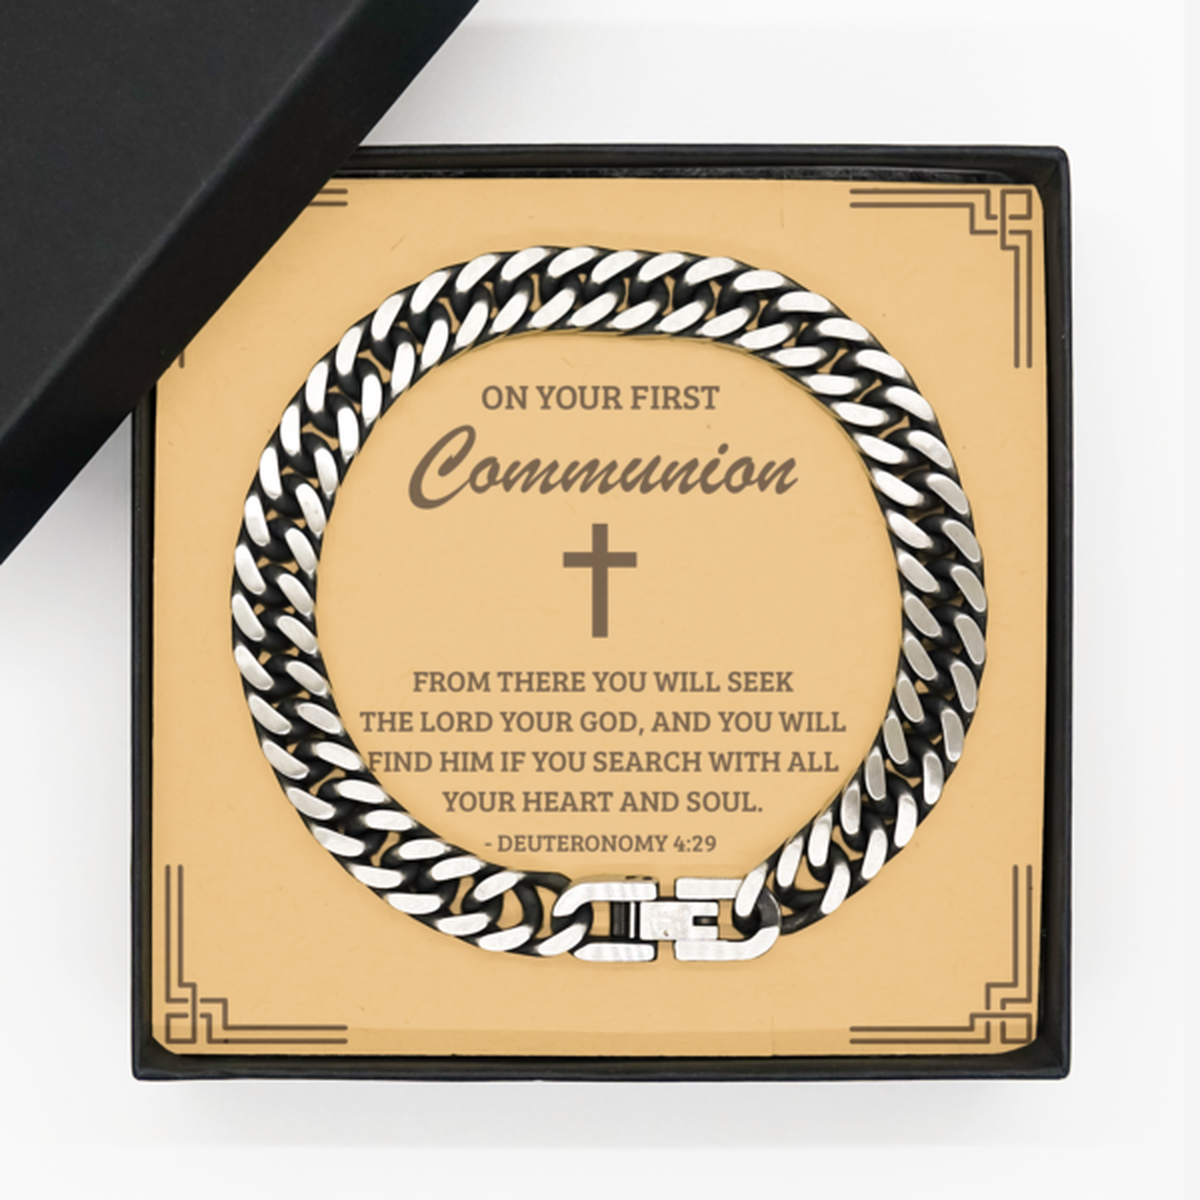 First Communion Gifts for Teenage Boys, From there you will seek the Lord your God, Cuban Link Chain Bracelet with Bible Verse Message Card, Religious Catholic Bracelet for Son, Grandson, Dad, Godfather